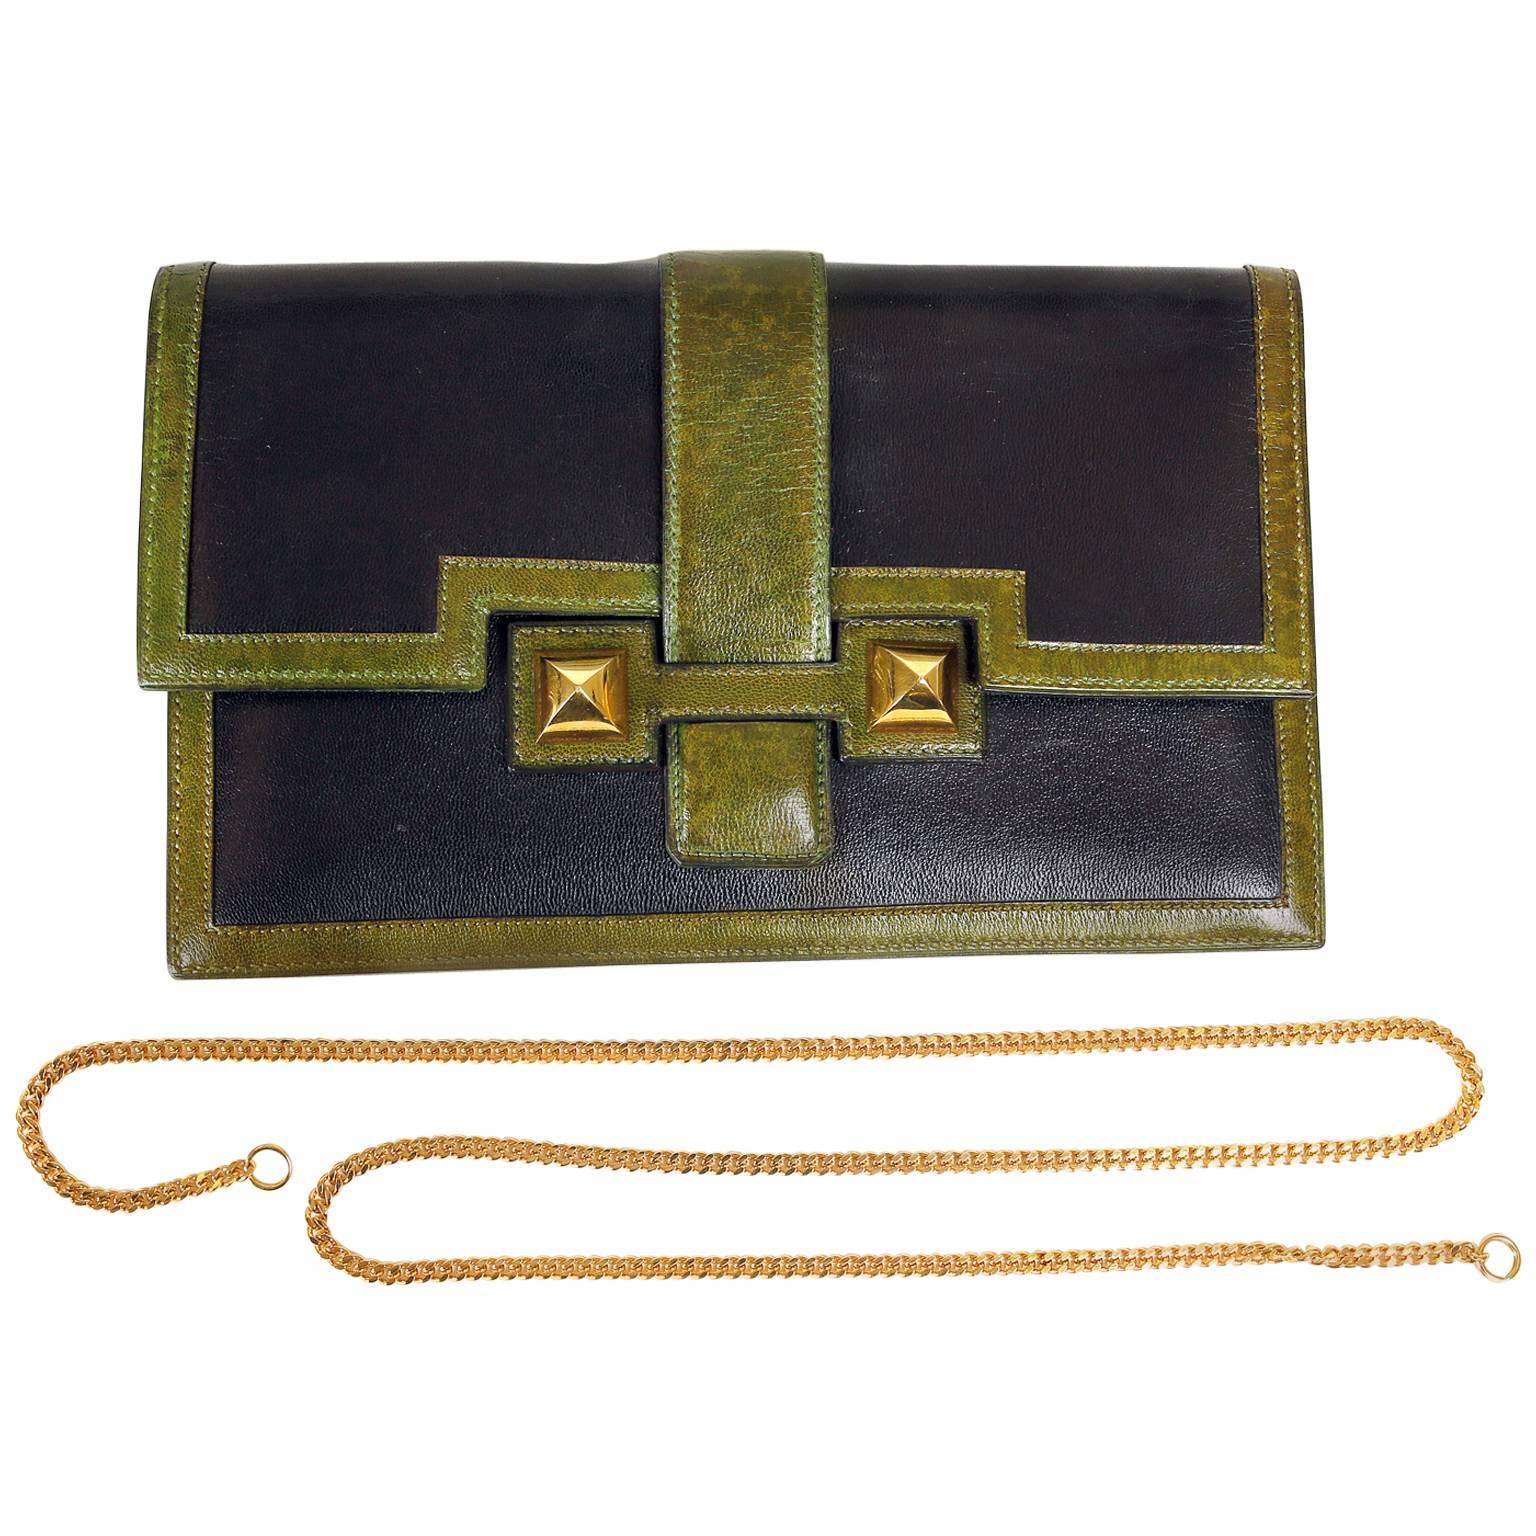 Hermès Black and Green Leather Clutch with chain strap For Sale